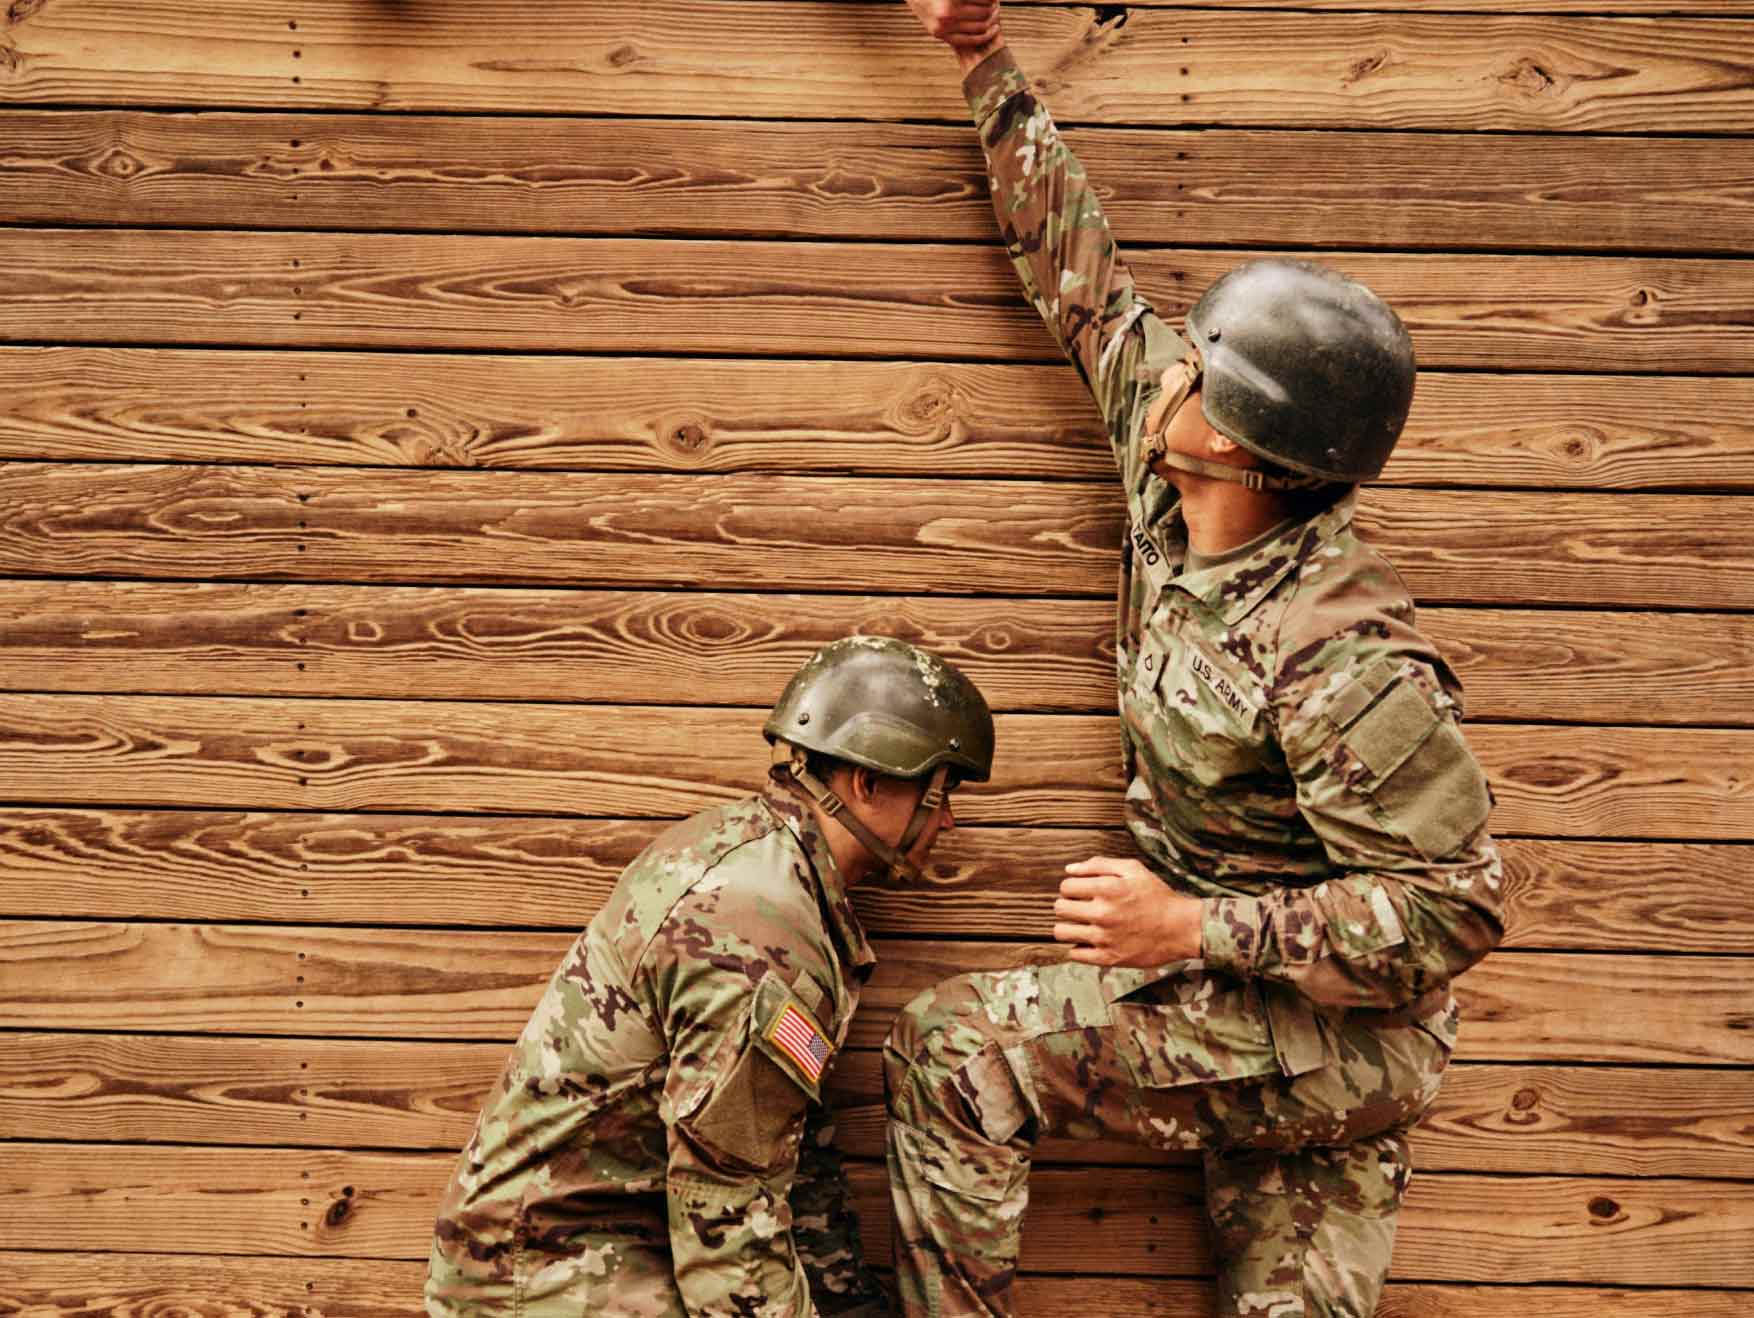 A Soldier bracing the foot of another Soldier to help him over a wooden obstacle